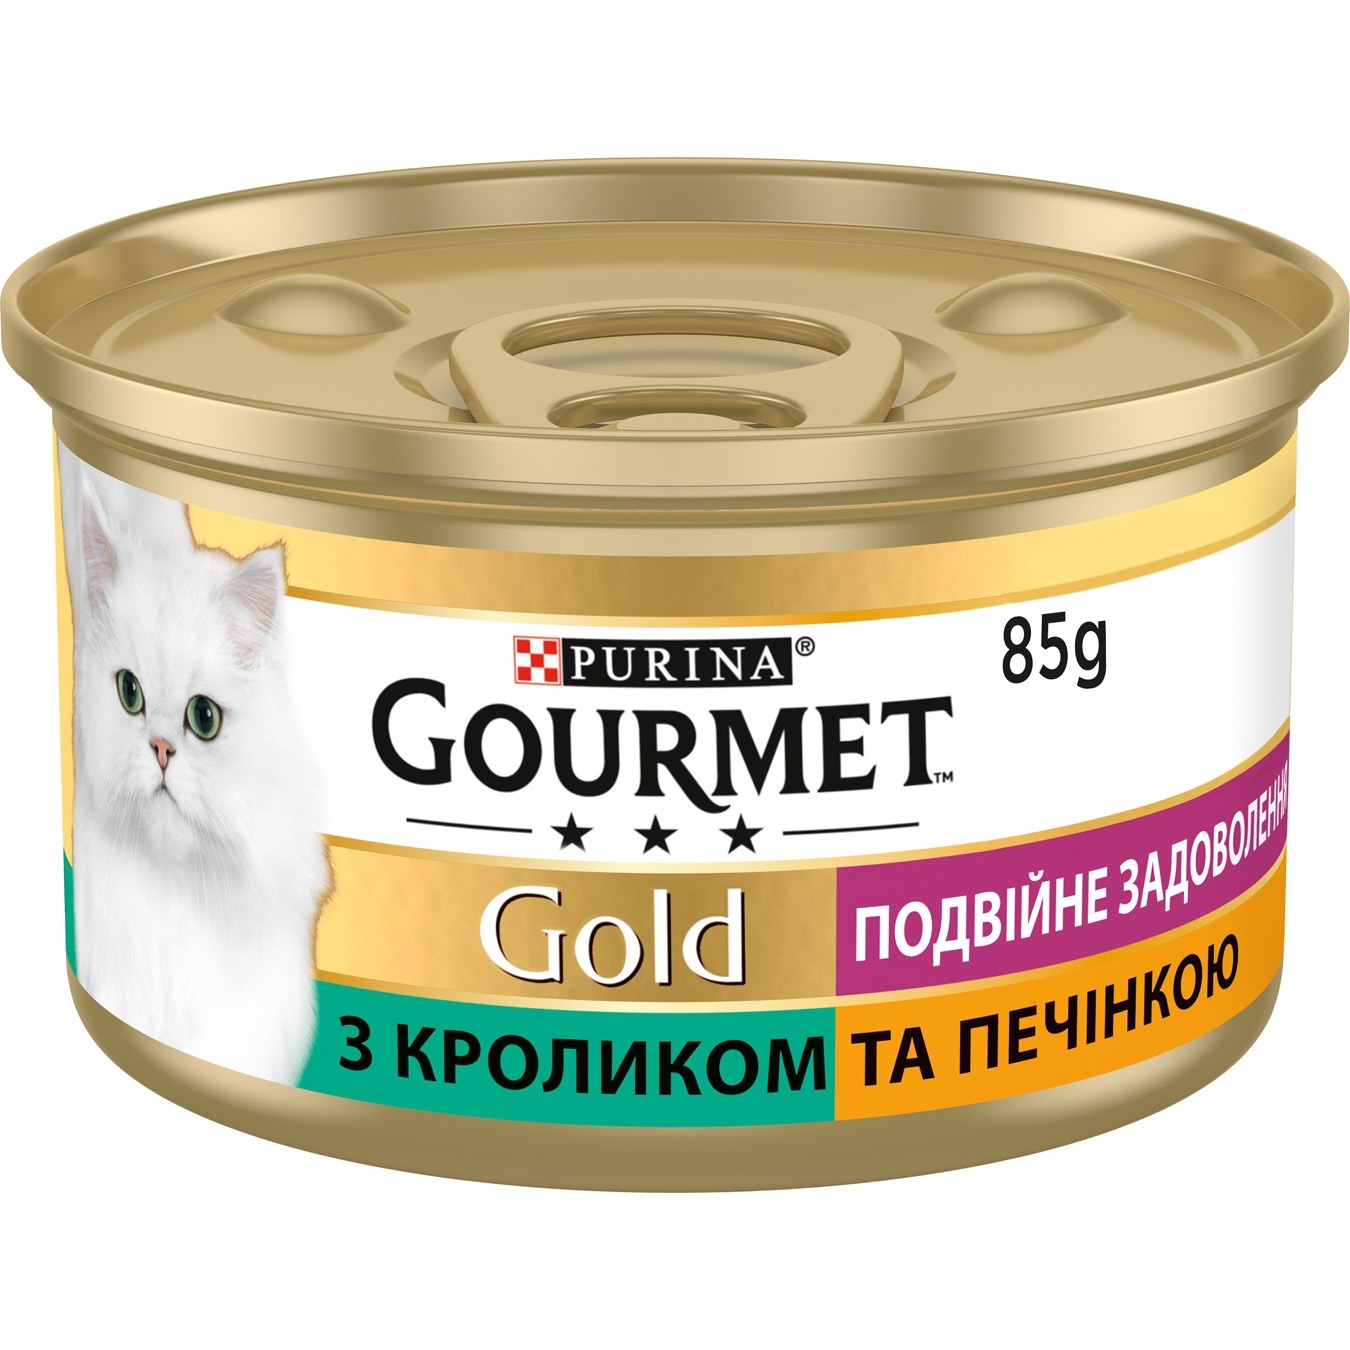 Purina Gourmet Gold Duo Food with Rabbit and Liver for Adult Cats 85g